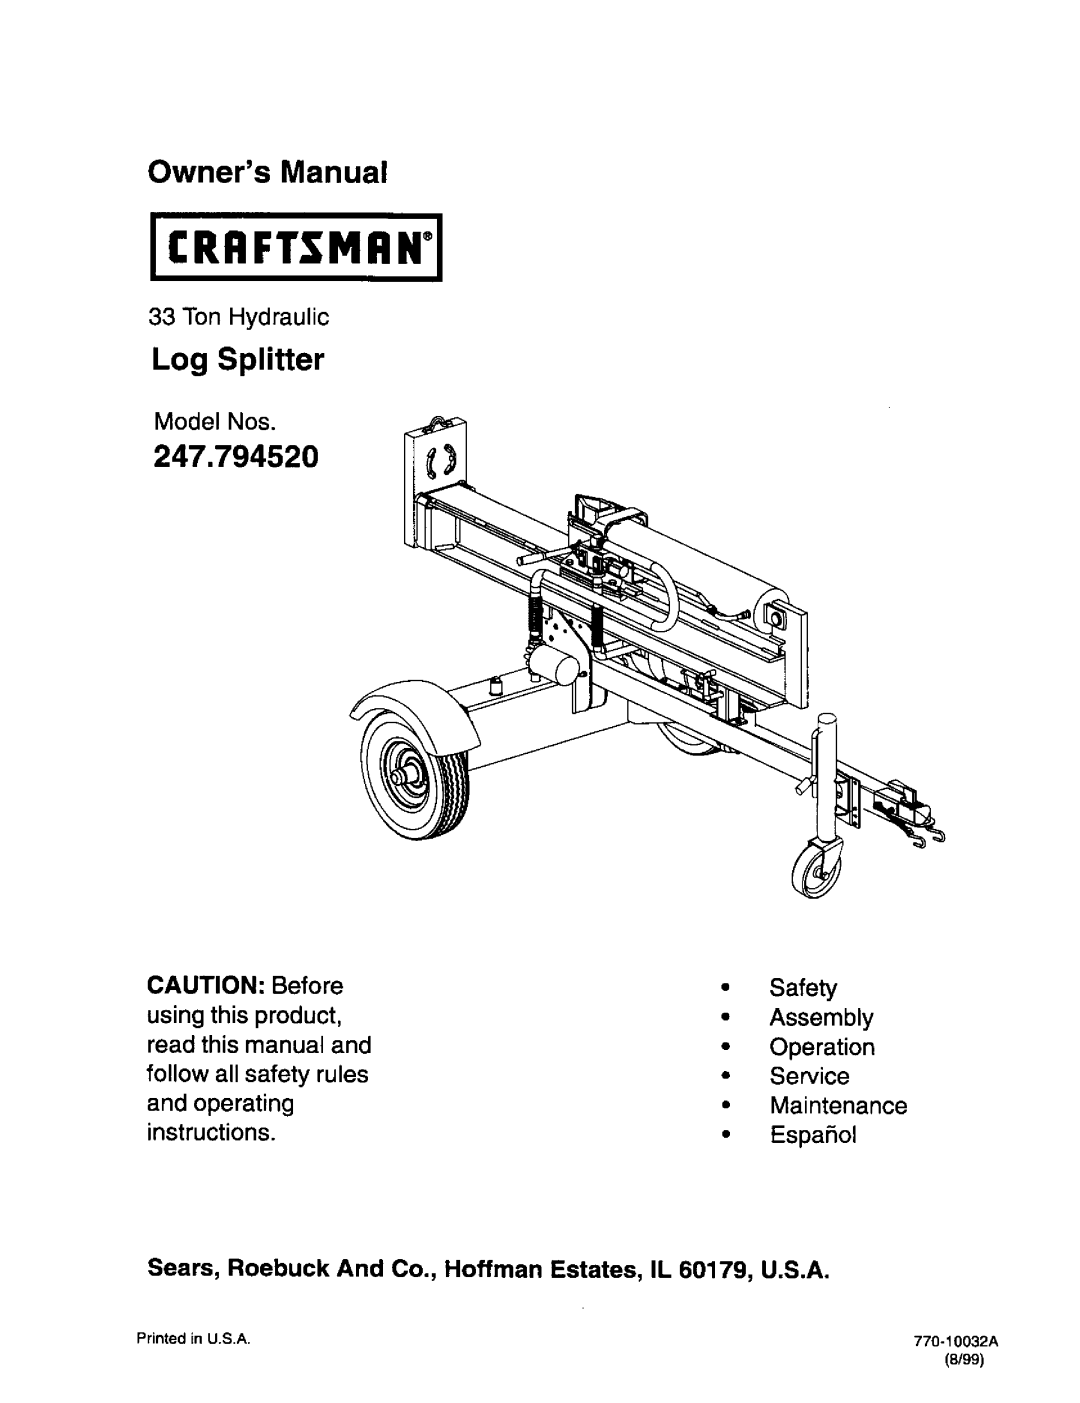 Craftsman 247.79452 owner manual Log Splitter, follow all safety rules, Service, and operating, Maintenance, instructions 